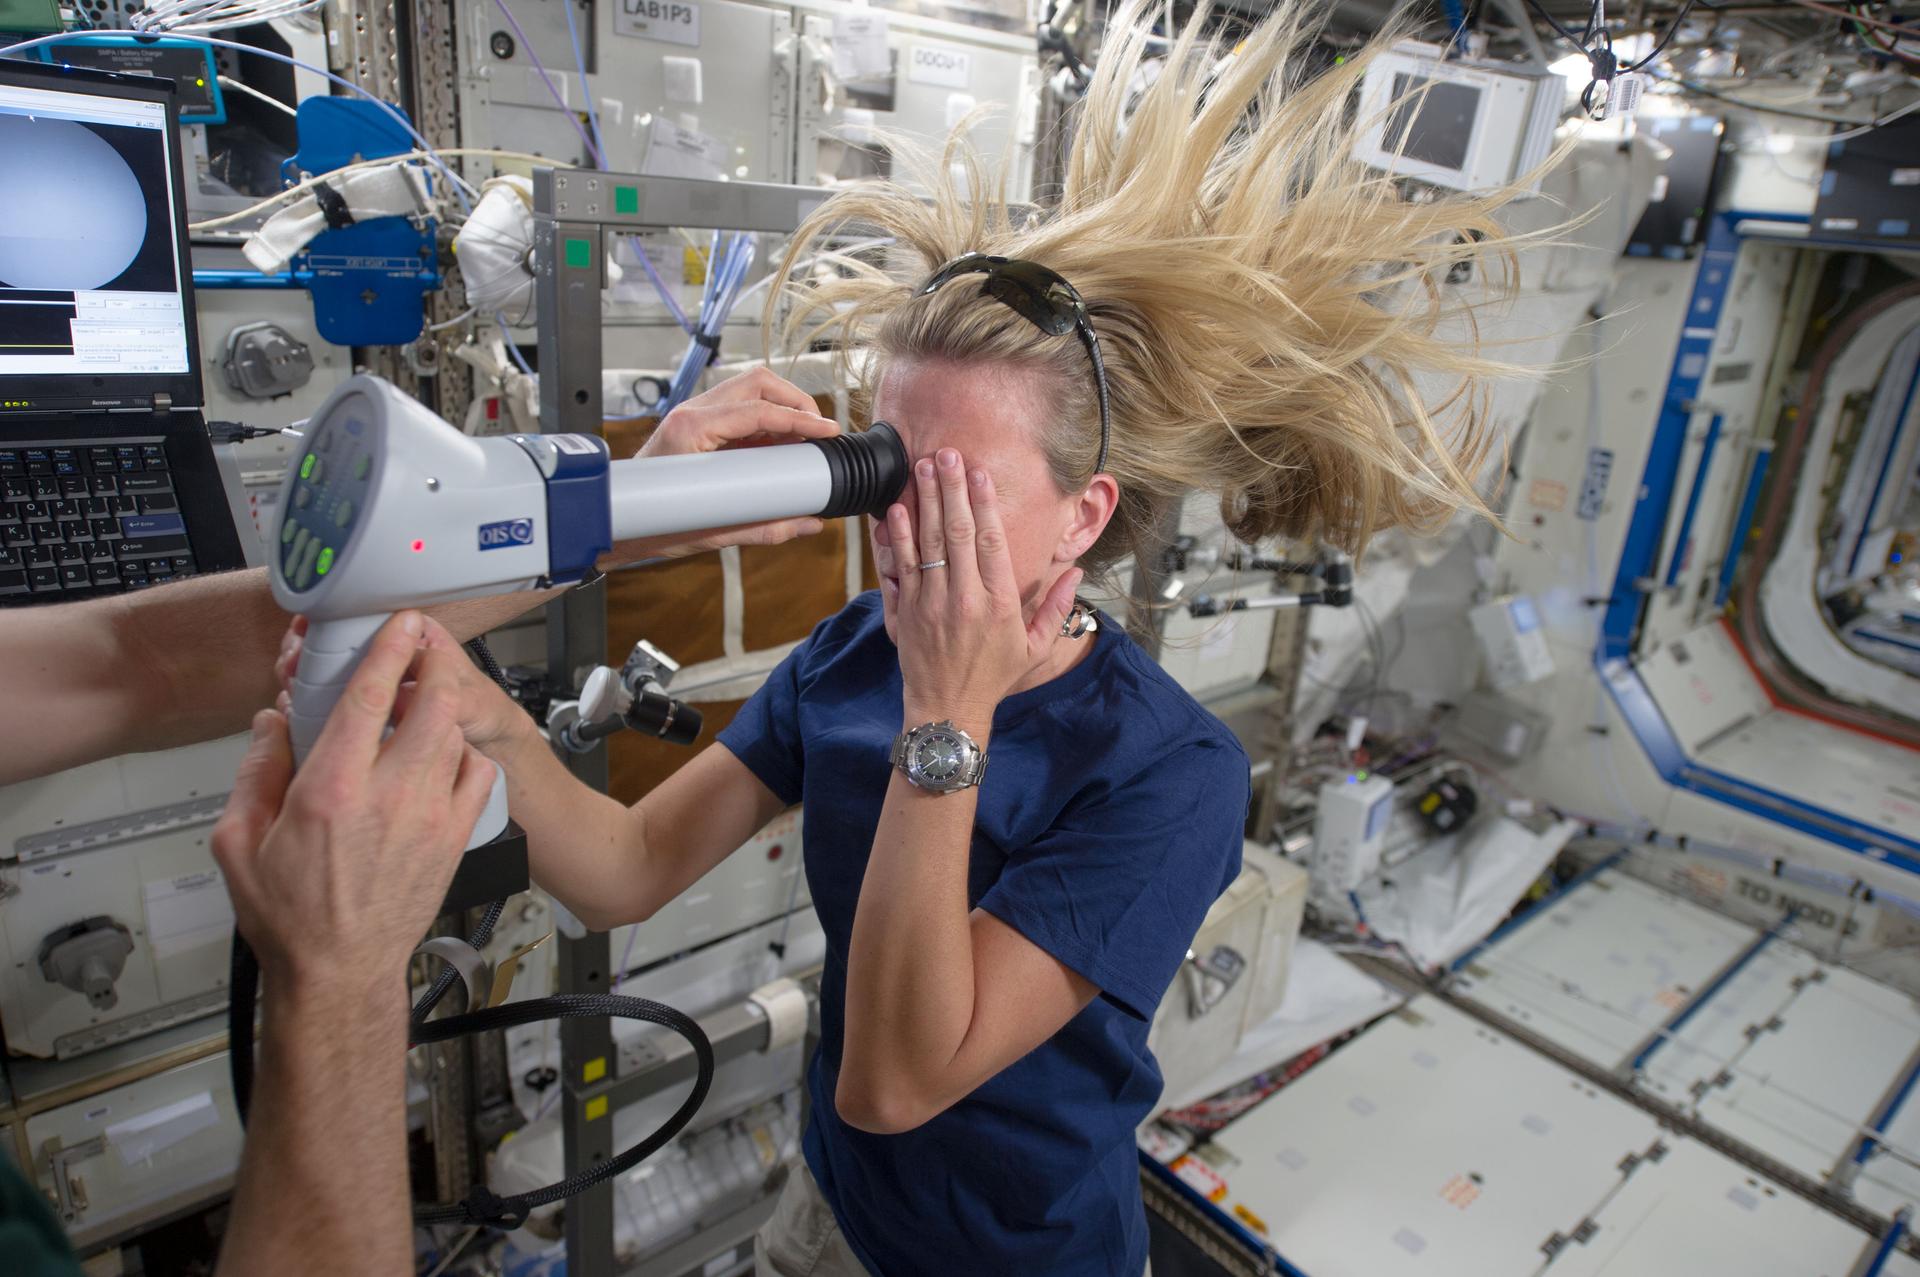 Astronaut Karen Nyberg and Astronaut Chris Cassidy (partially visible), both Expedition 37 flight engineers, perform an Ocular Health (OH) Fundoscope Exam in the Destiny laboratory of the International Space Station